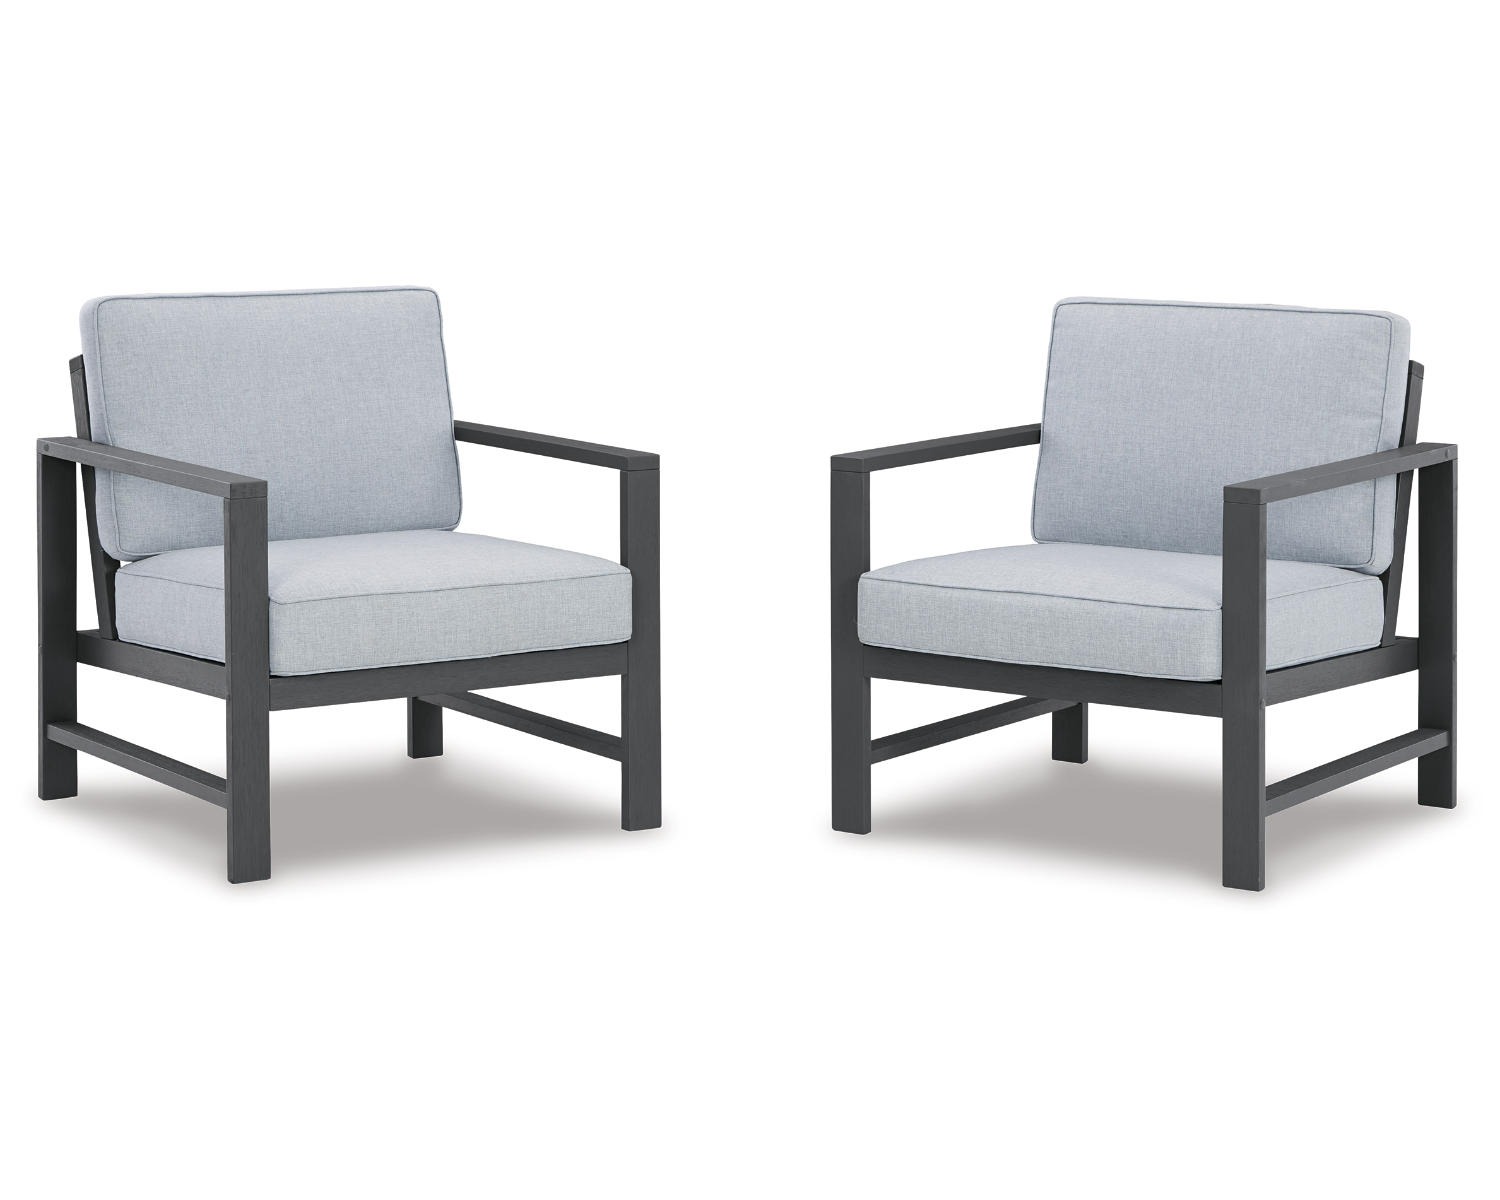 Signature Design by Ashley Casual Fynnegan Lounge Chair with Cushion (Set of 2)  Gray - image 1 of 7